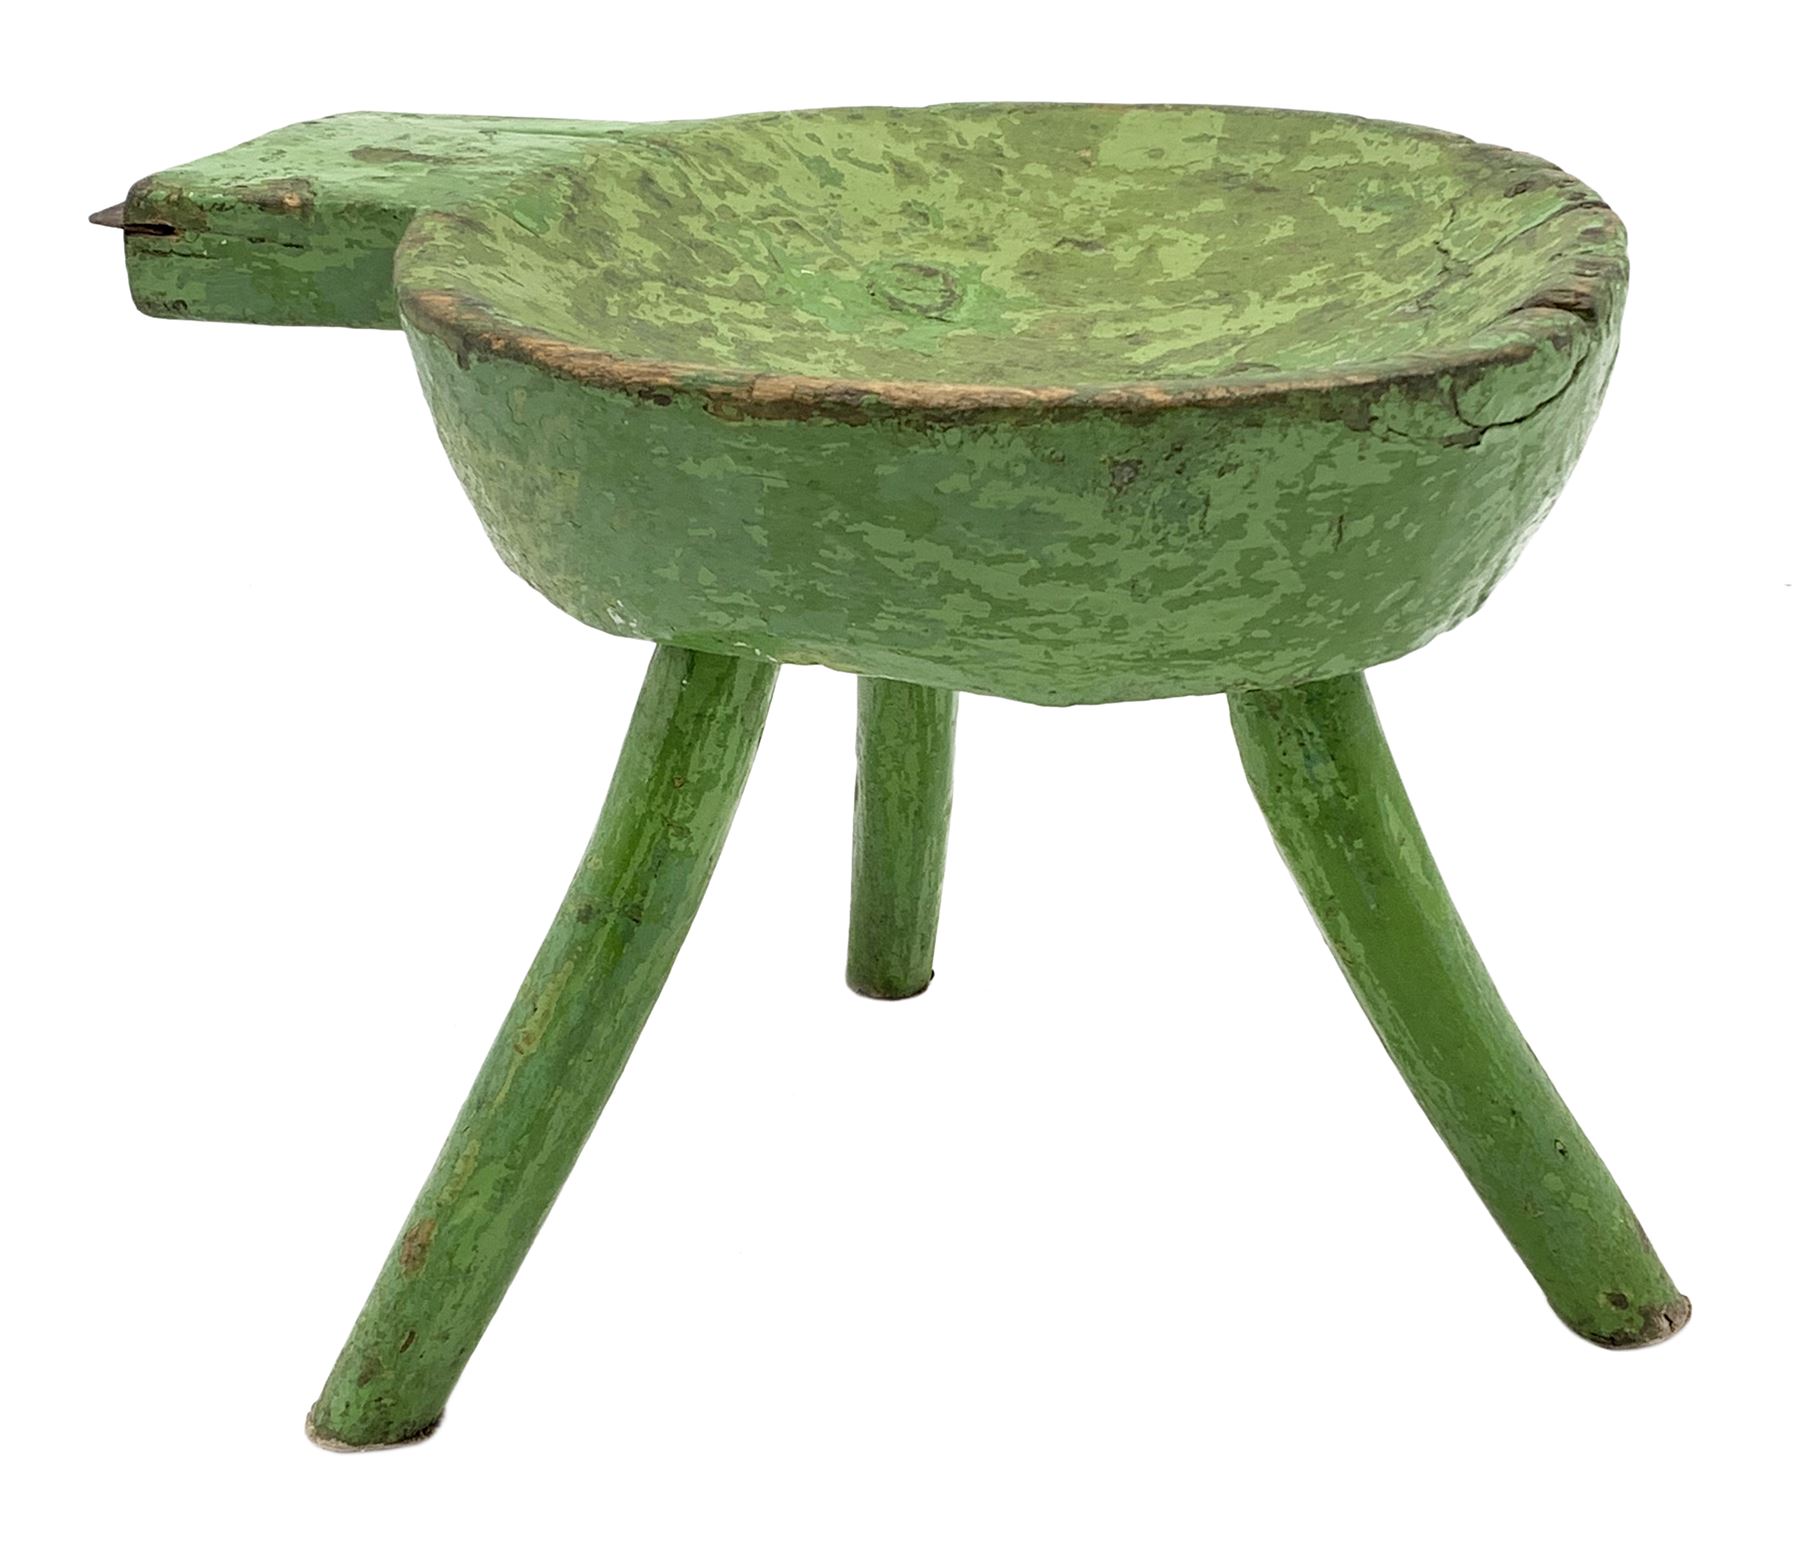 18th/19th century vernacular primitive green painted stool with dished seat fitted with metal scrape